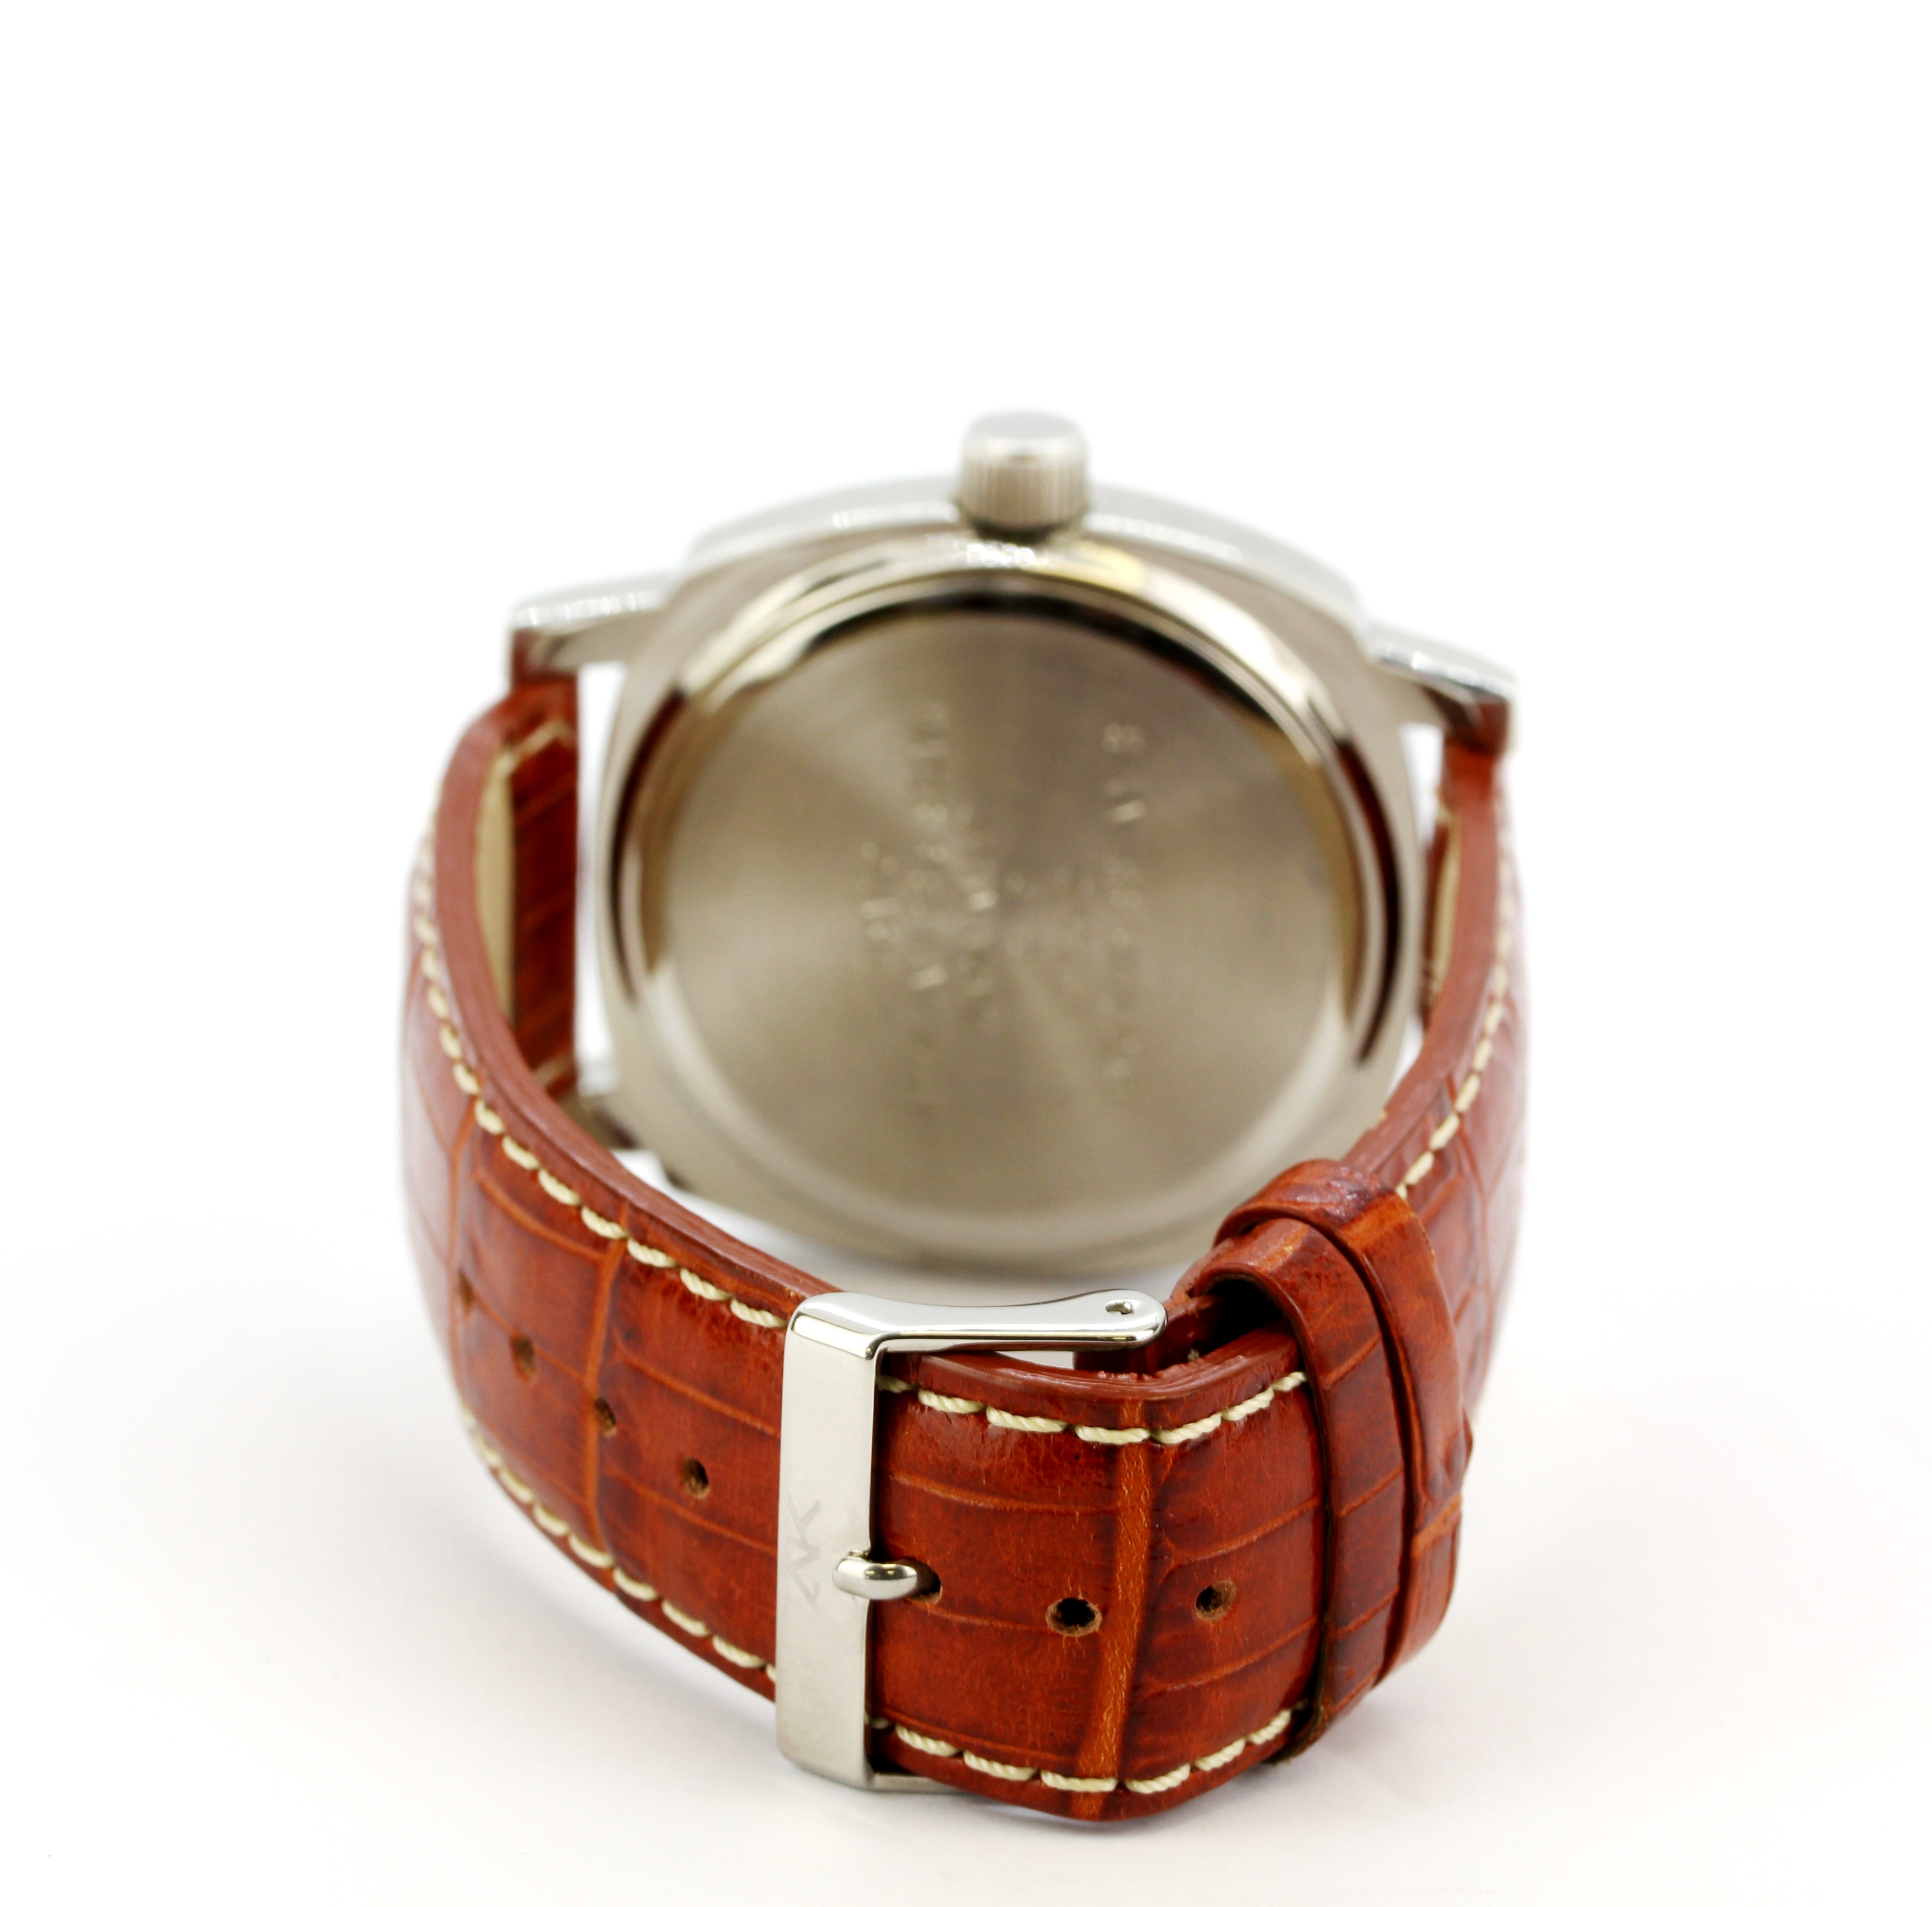 An Anne Klein steel chronographic (no. 6P29, 10/5273) wristwatch on a brown embossed leather strap. - Image 2 of 5